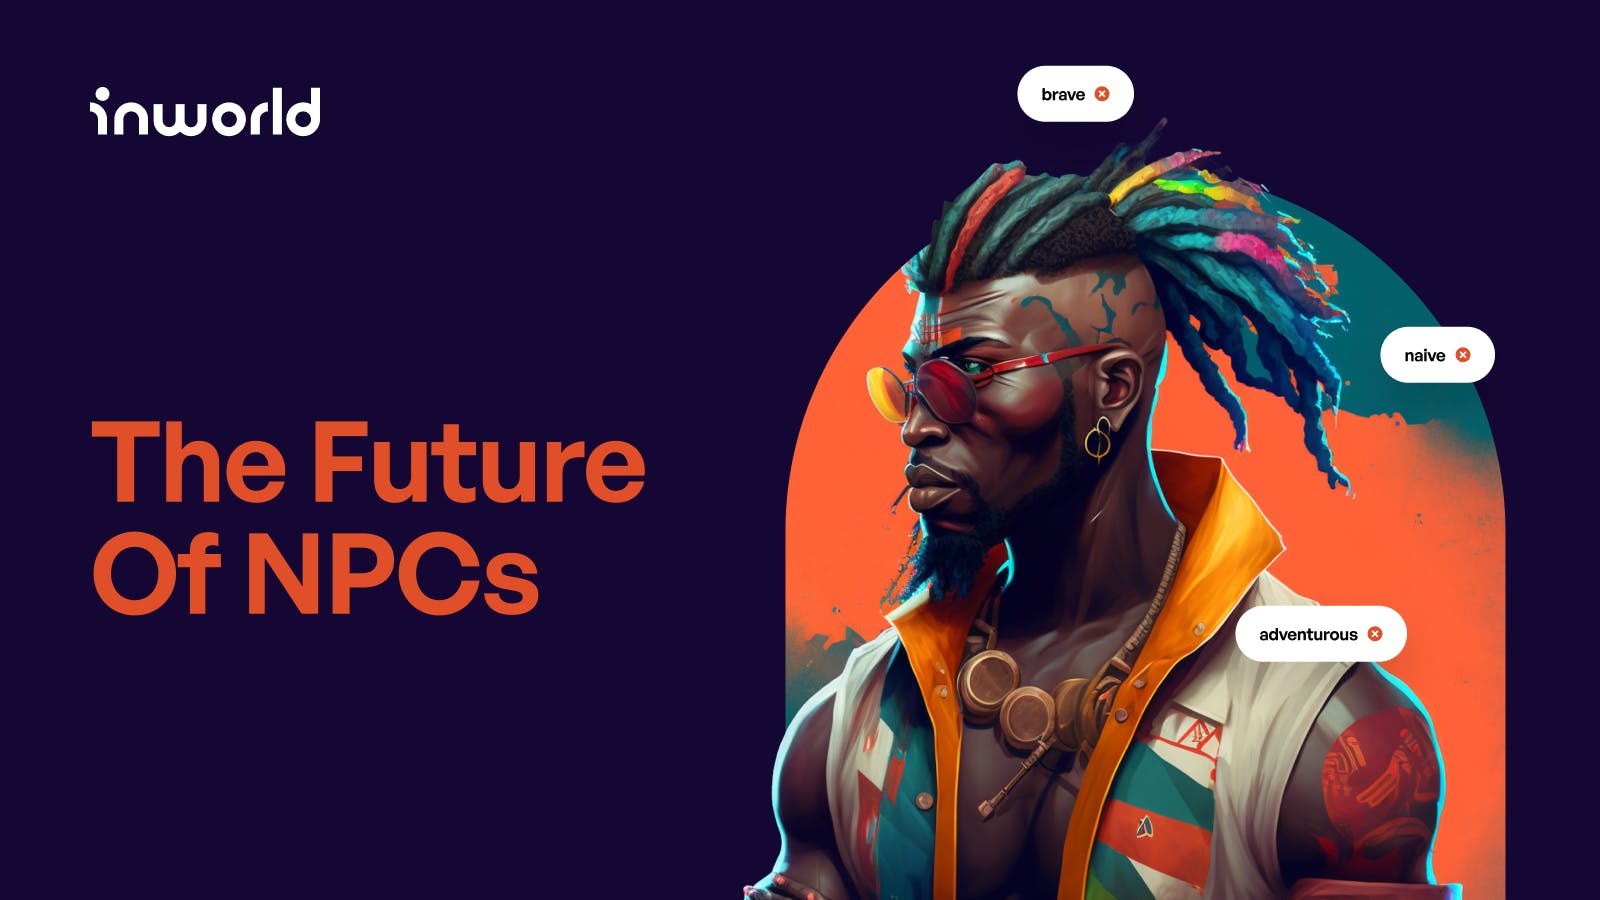 The text says the future of NPCs and it has a black NPC character with colorful dreads in a white, green, and orange vest. 